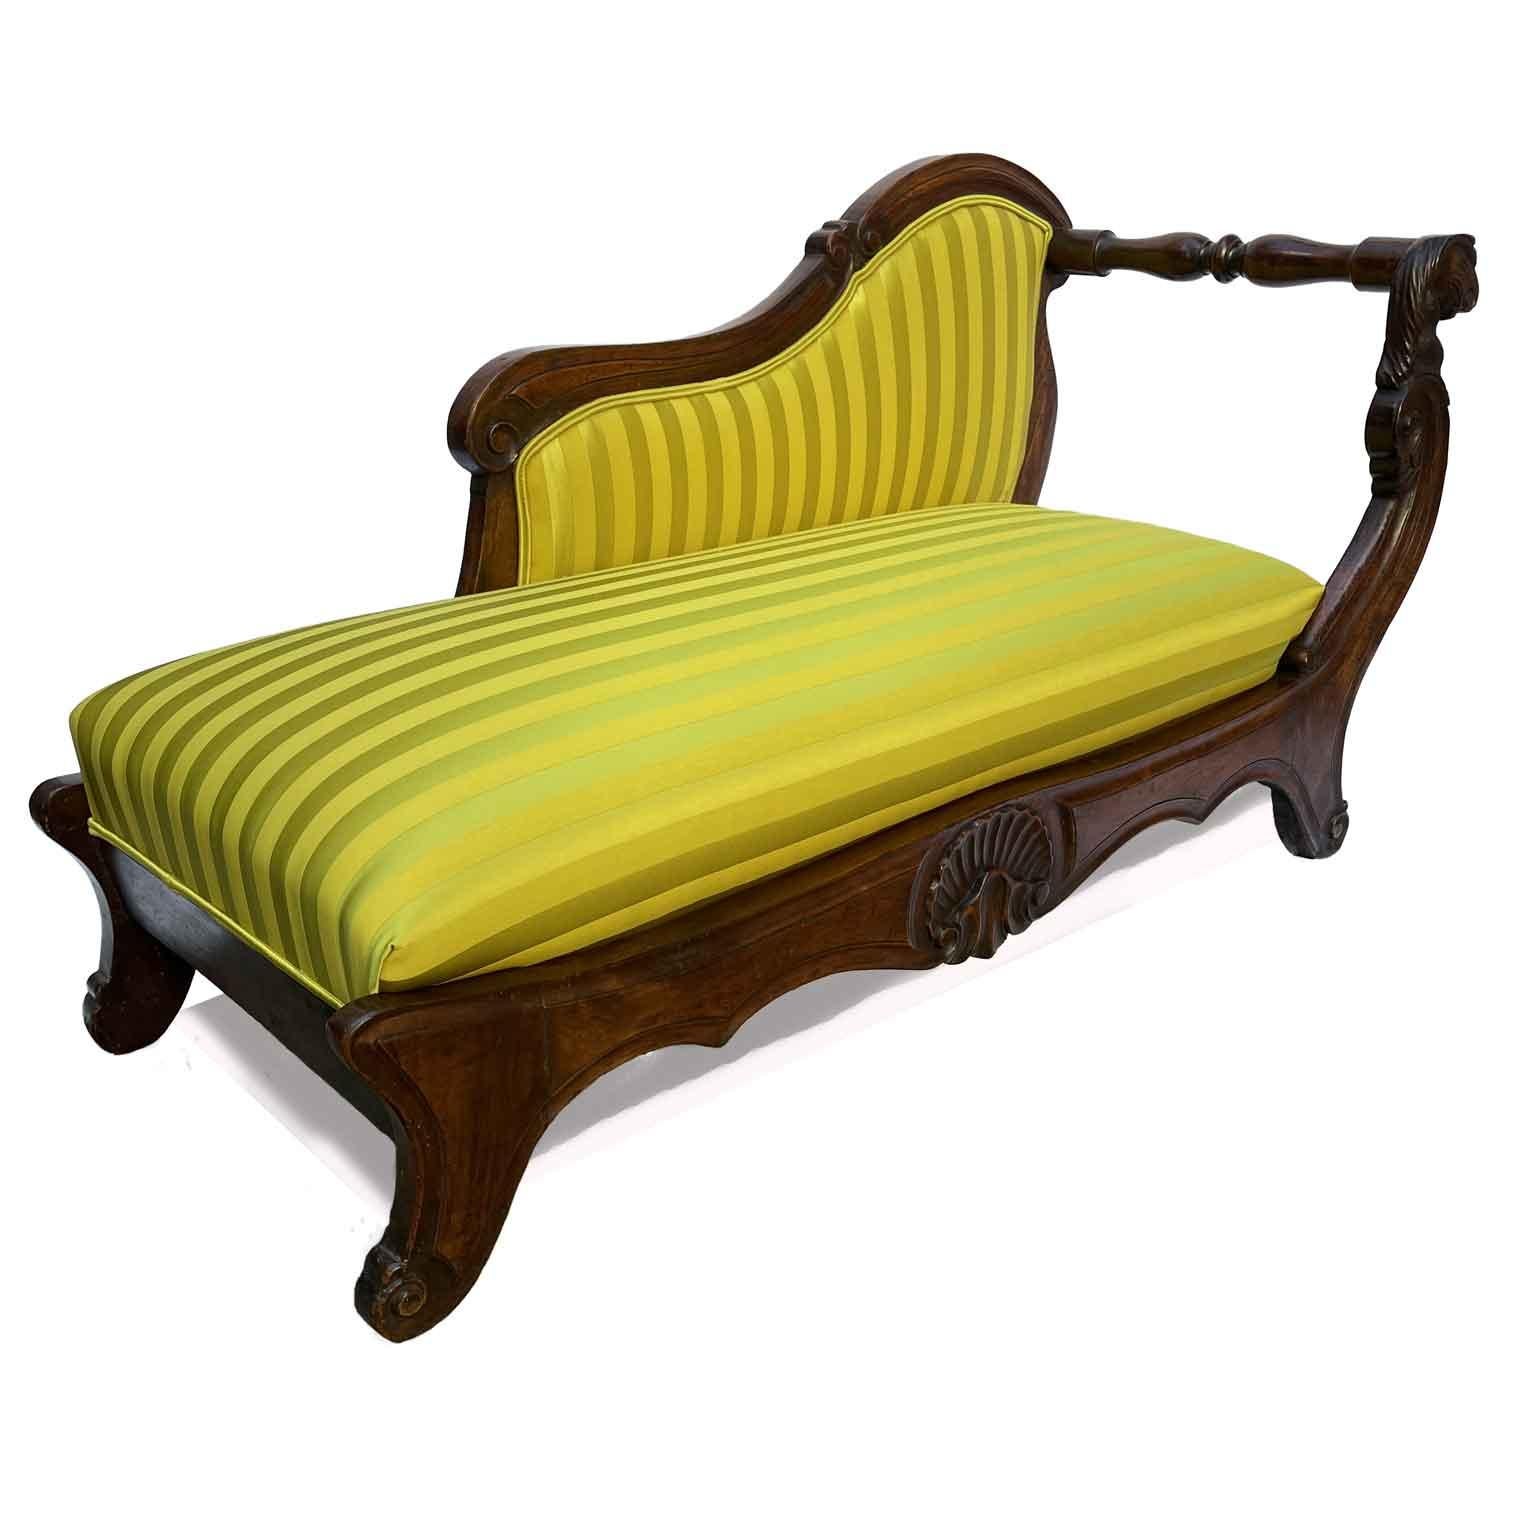 Walnut Dormeuse Mid-1800s with an unusual shape in that it lacks a side back in place of which we find a turned wooden crosspiece. The settee has a solid walnut frame with a beautiful patina; the front is centered by a carved shell,  while the front